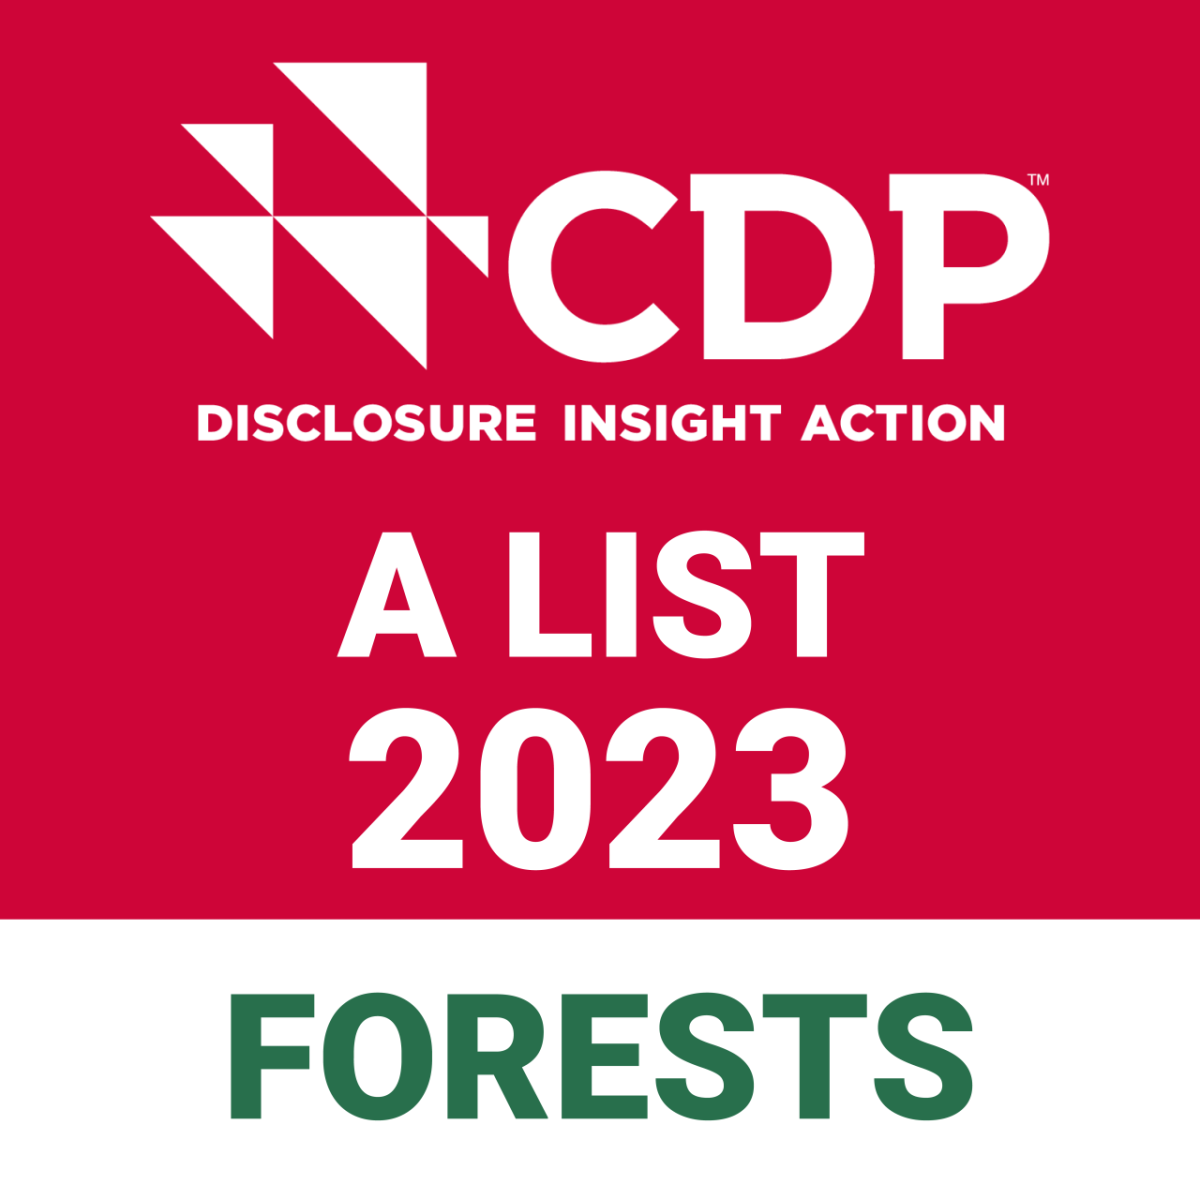 CDP Disclosure Insight Action A List 2023 Forests.